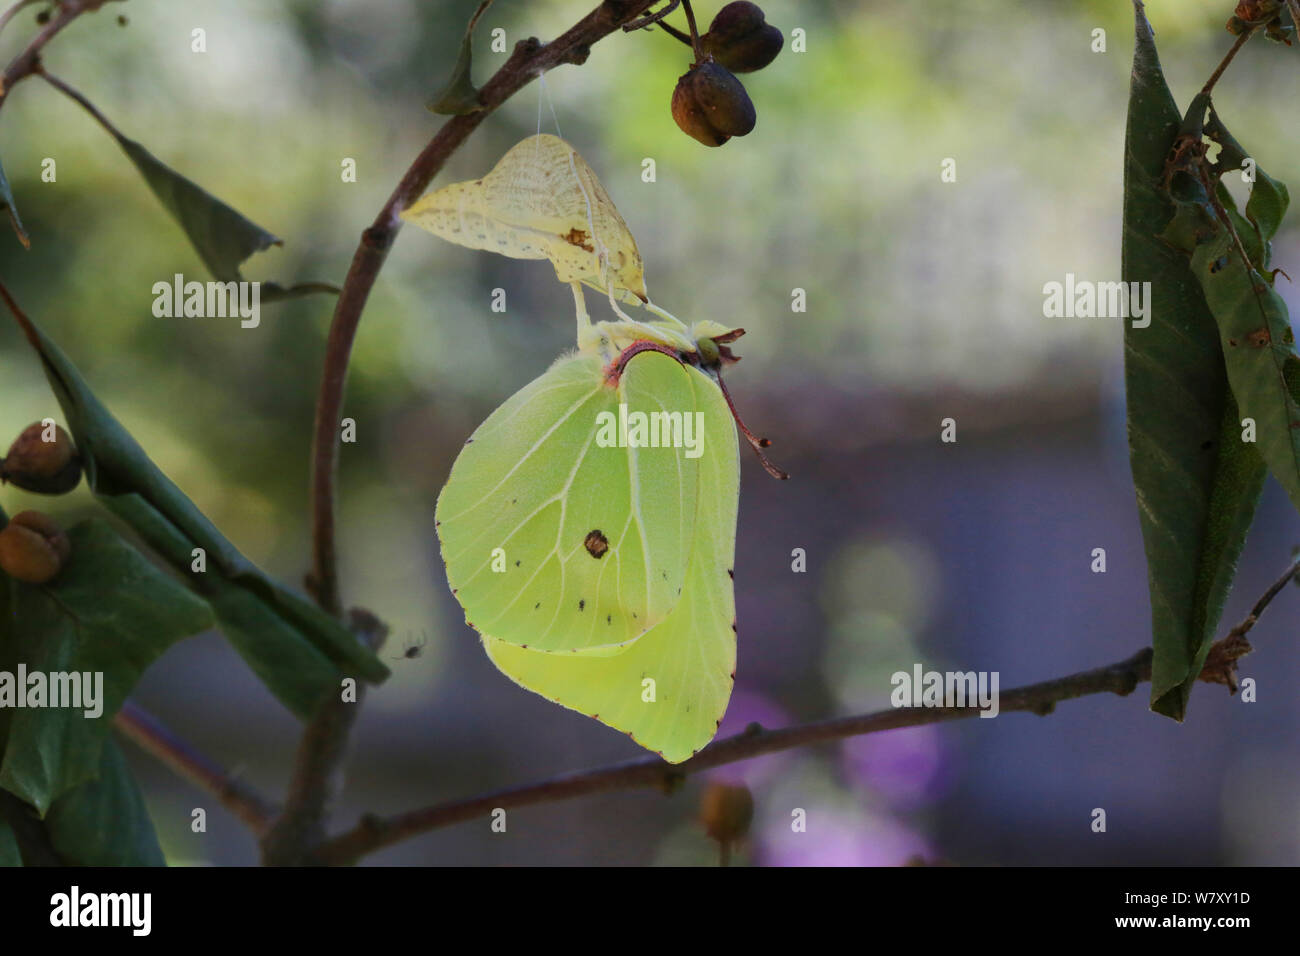 Brimstone butterfly (Gonepteryx rhamni) with wings almost fully expanded after after emerging from pupa, Surrey, England, July. Sequence 8 of 8. Stock Photo